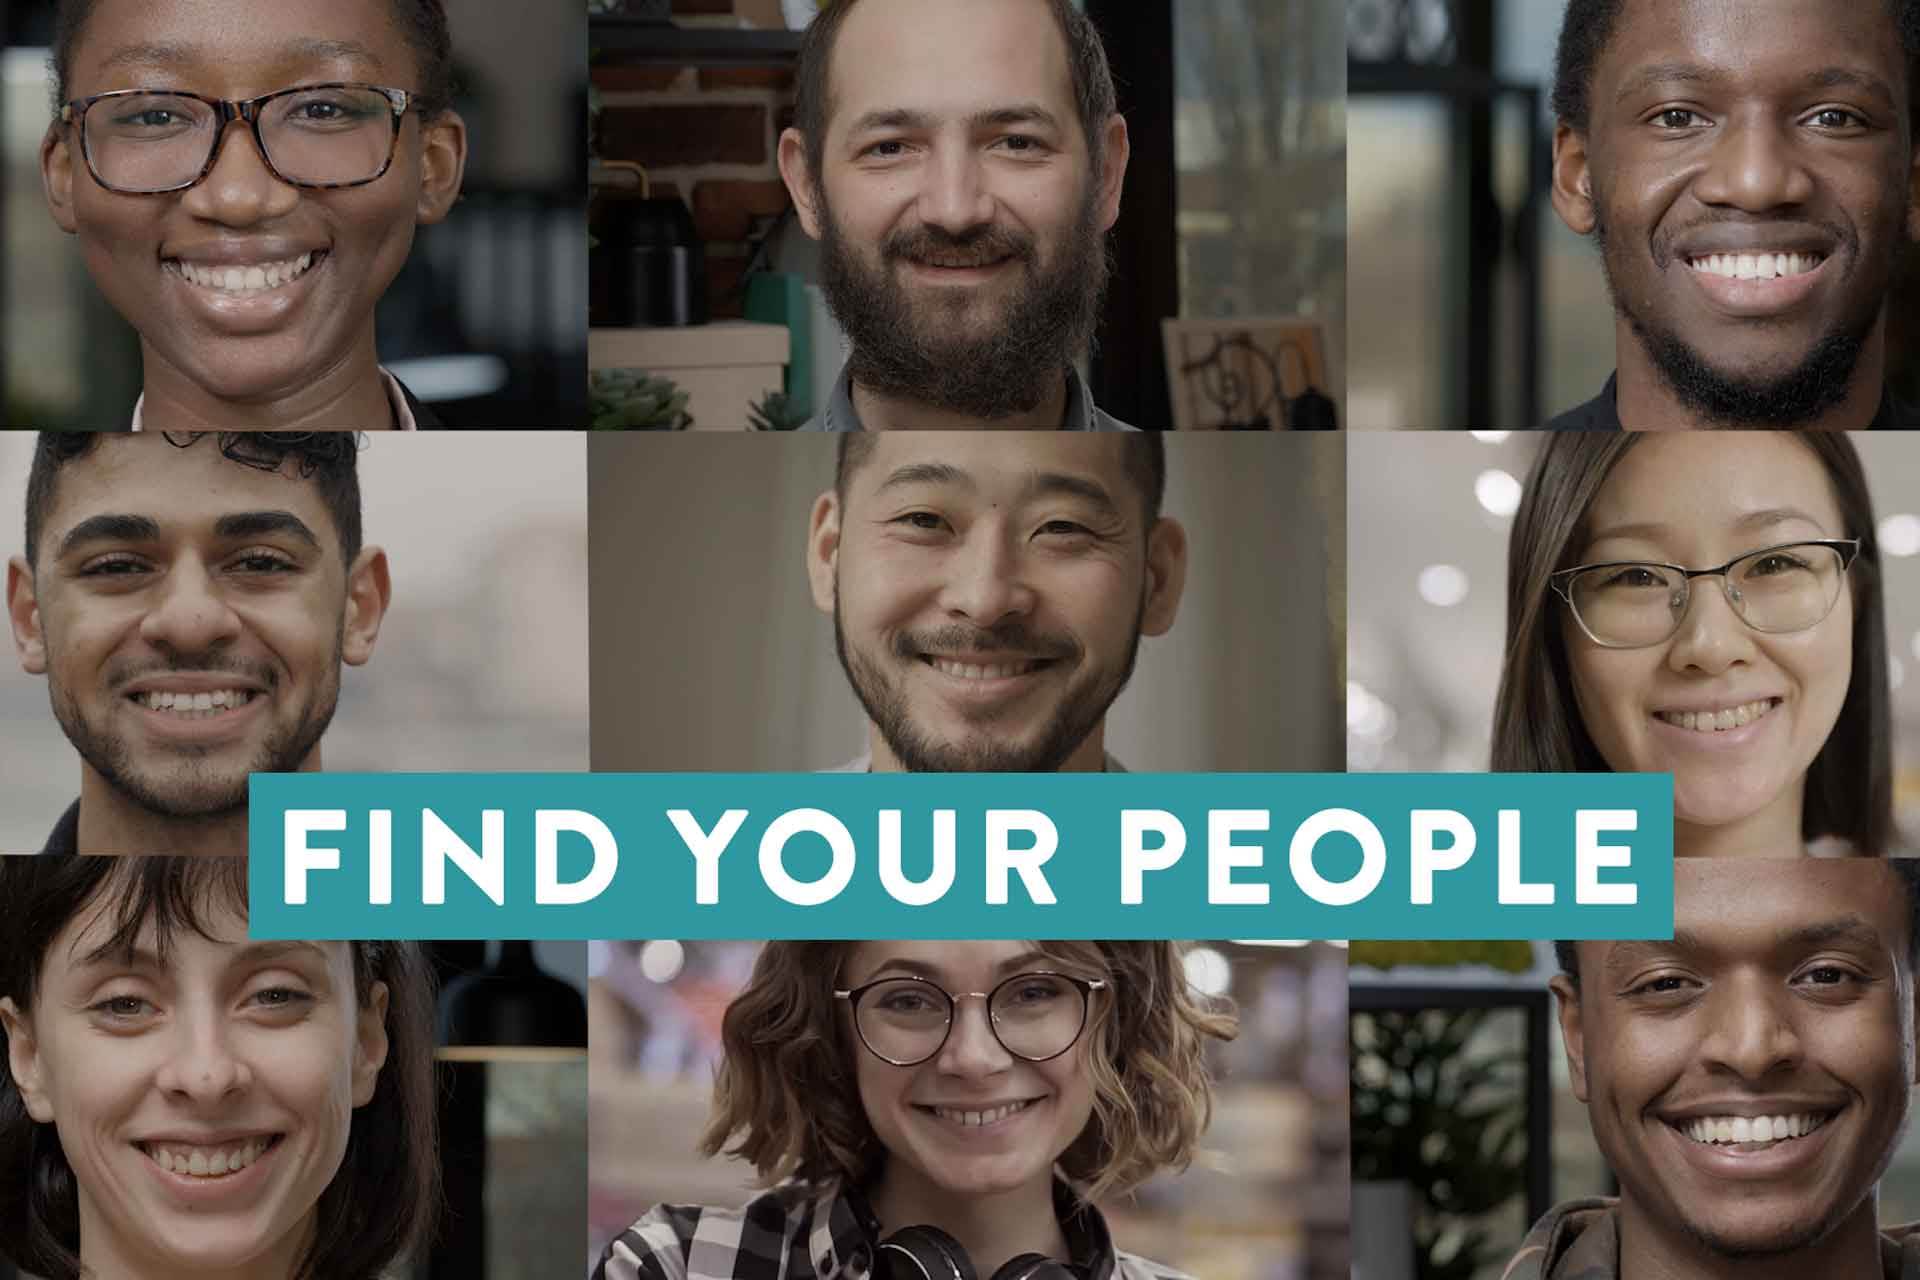 Link to Find Your People detail page